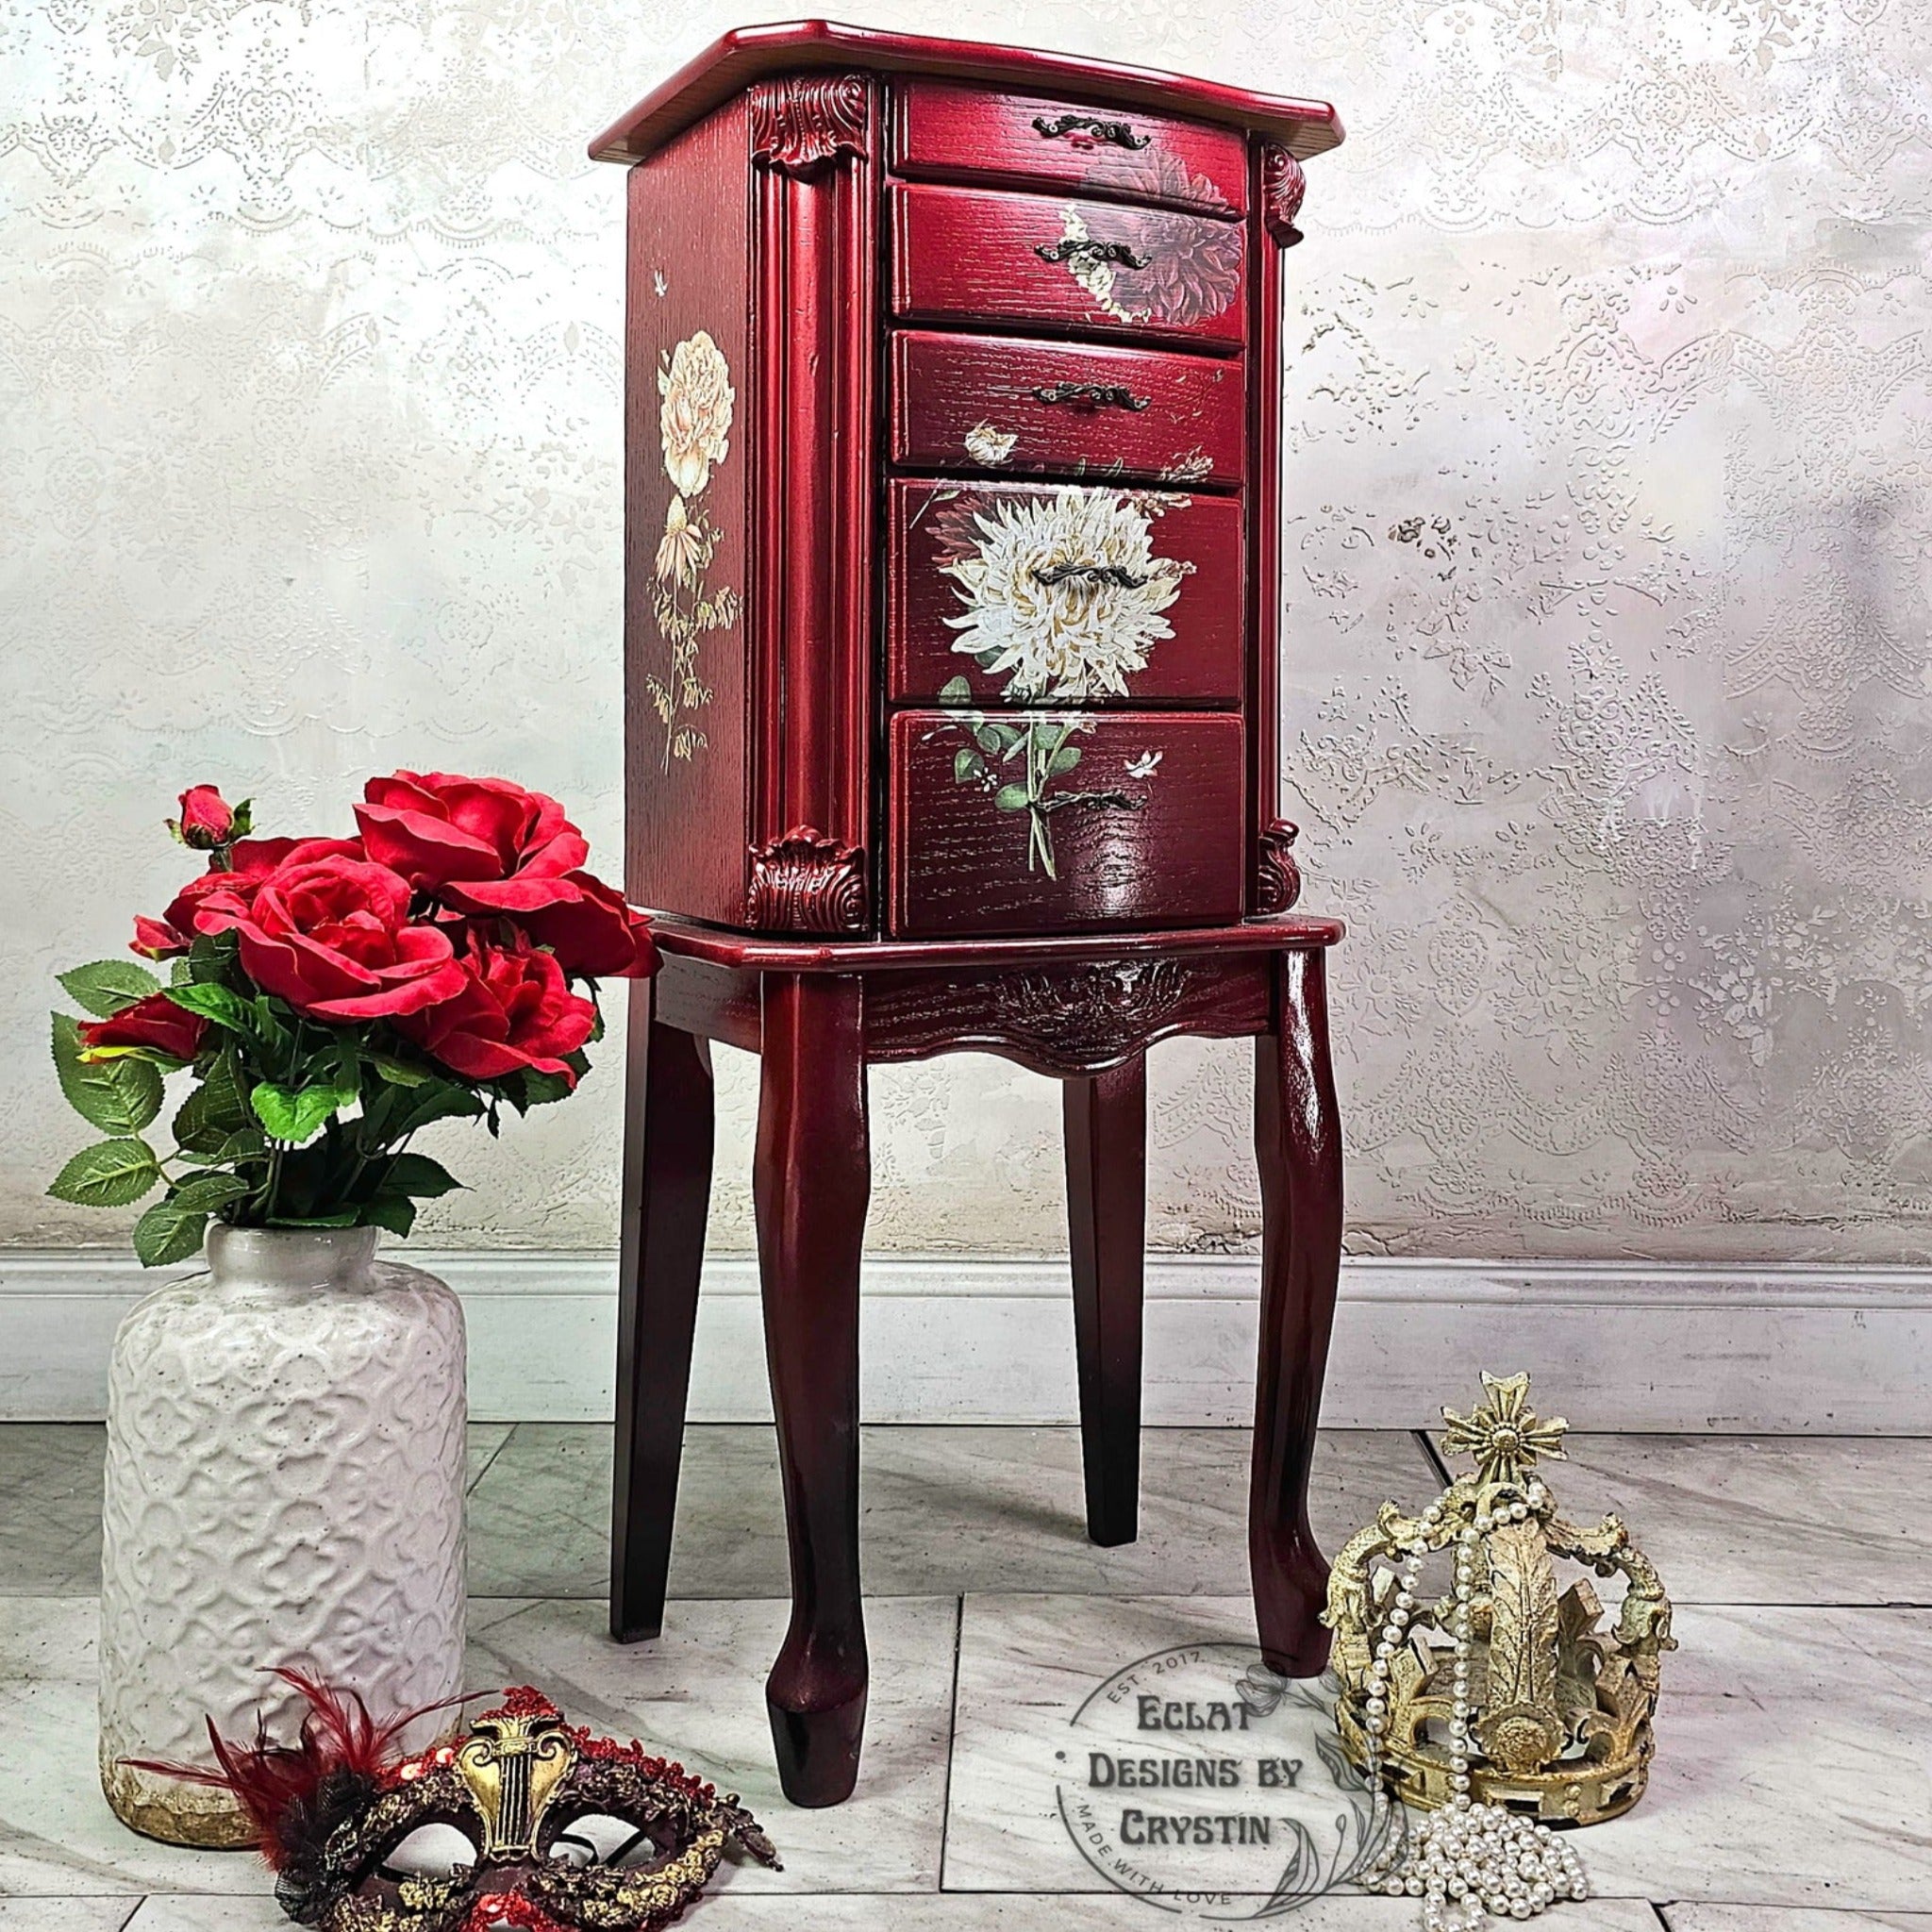 A vintage standing jewelry armoire refurbished by Eclat Designs by Crystin is painted dark cherry red and features ReDesign with Prima's Willow Way small transfer on the front and sides.